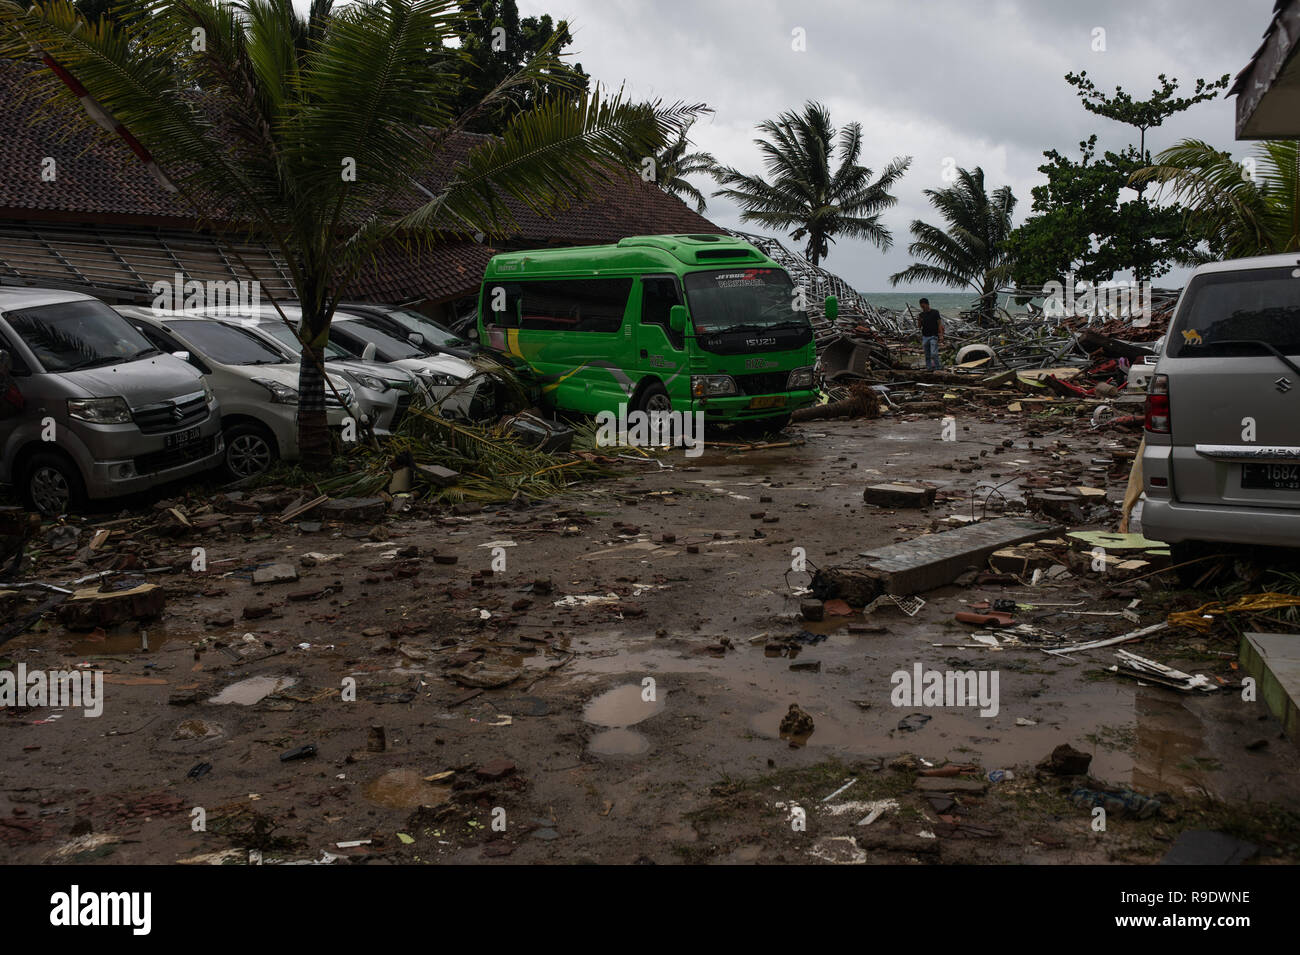 Pandeglang, Indonesia. 23rd Dec, 2018. Vehicles are seen among the debris after a tsunami hit Sunda Strait in Pandeglang, Banten province, in Indonesia, Dec. 23, 2018. The total casualty of a tsunami triggered by the eruption of Krakatau Child volcano has increased to 168 people in coastal areas of Sunda Strait of western Indonesia, disaster agency official said here on Sunday. The catastrophe killed at least 168 people, wounded at least 745 ones and collapsed a total of 430 houses and nine hotels, and caused damages to scores of ships. Credit: Veri Sanovri/Xinhua/Alamy Live News Stock Photo